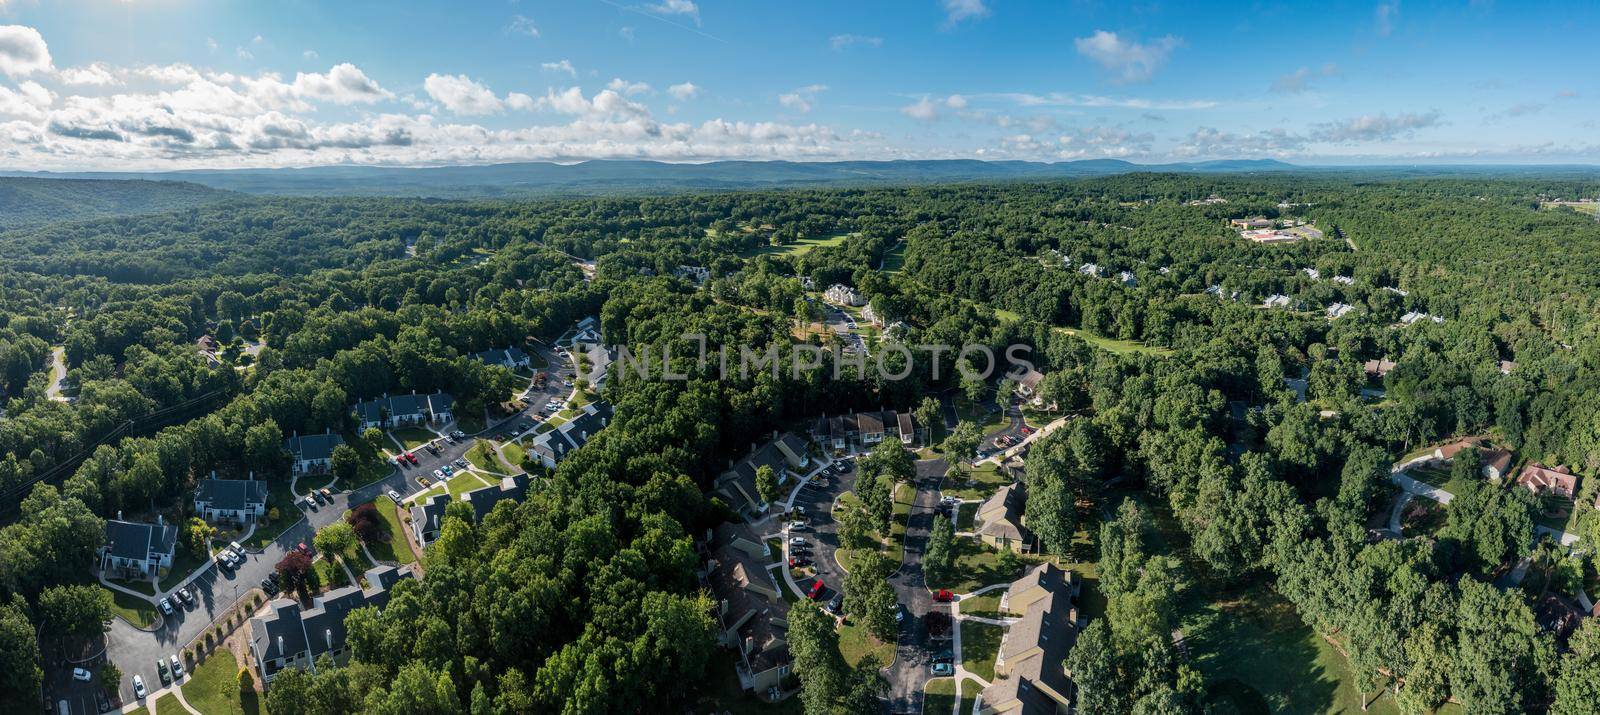 Aerial drone view of a residential golf and vacation community development in Fairfield Glade Tennessee